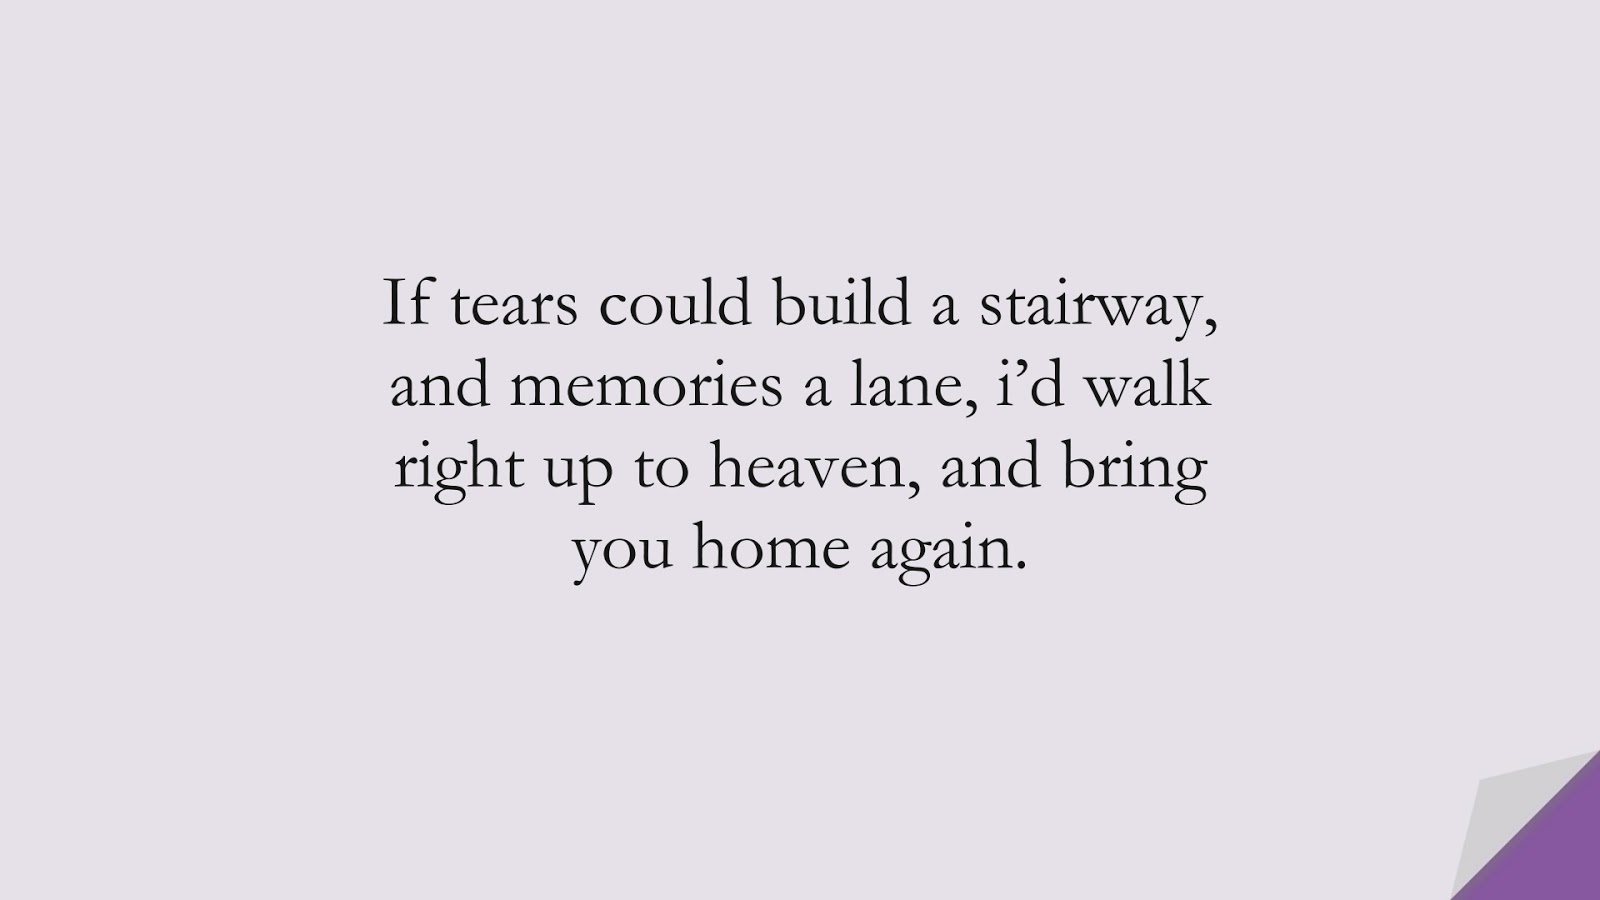 If tears could build a stairway, and memories a lane, i’d walk right up to heaven, and bring you home again.FALSE